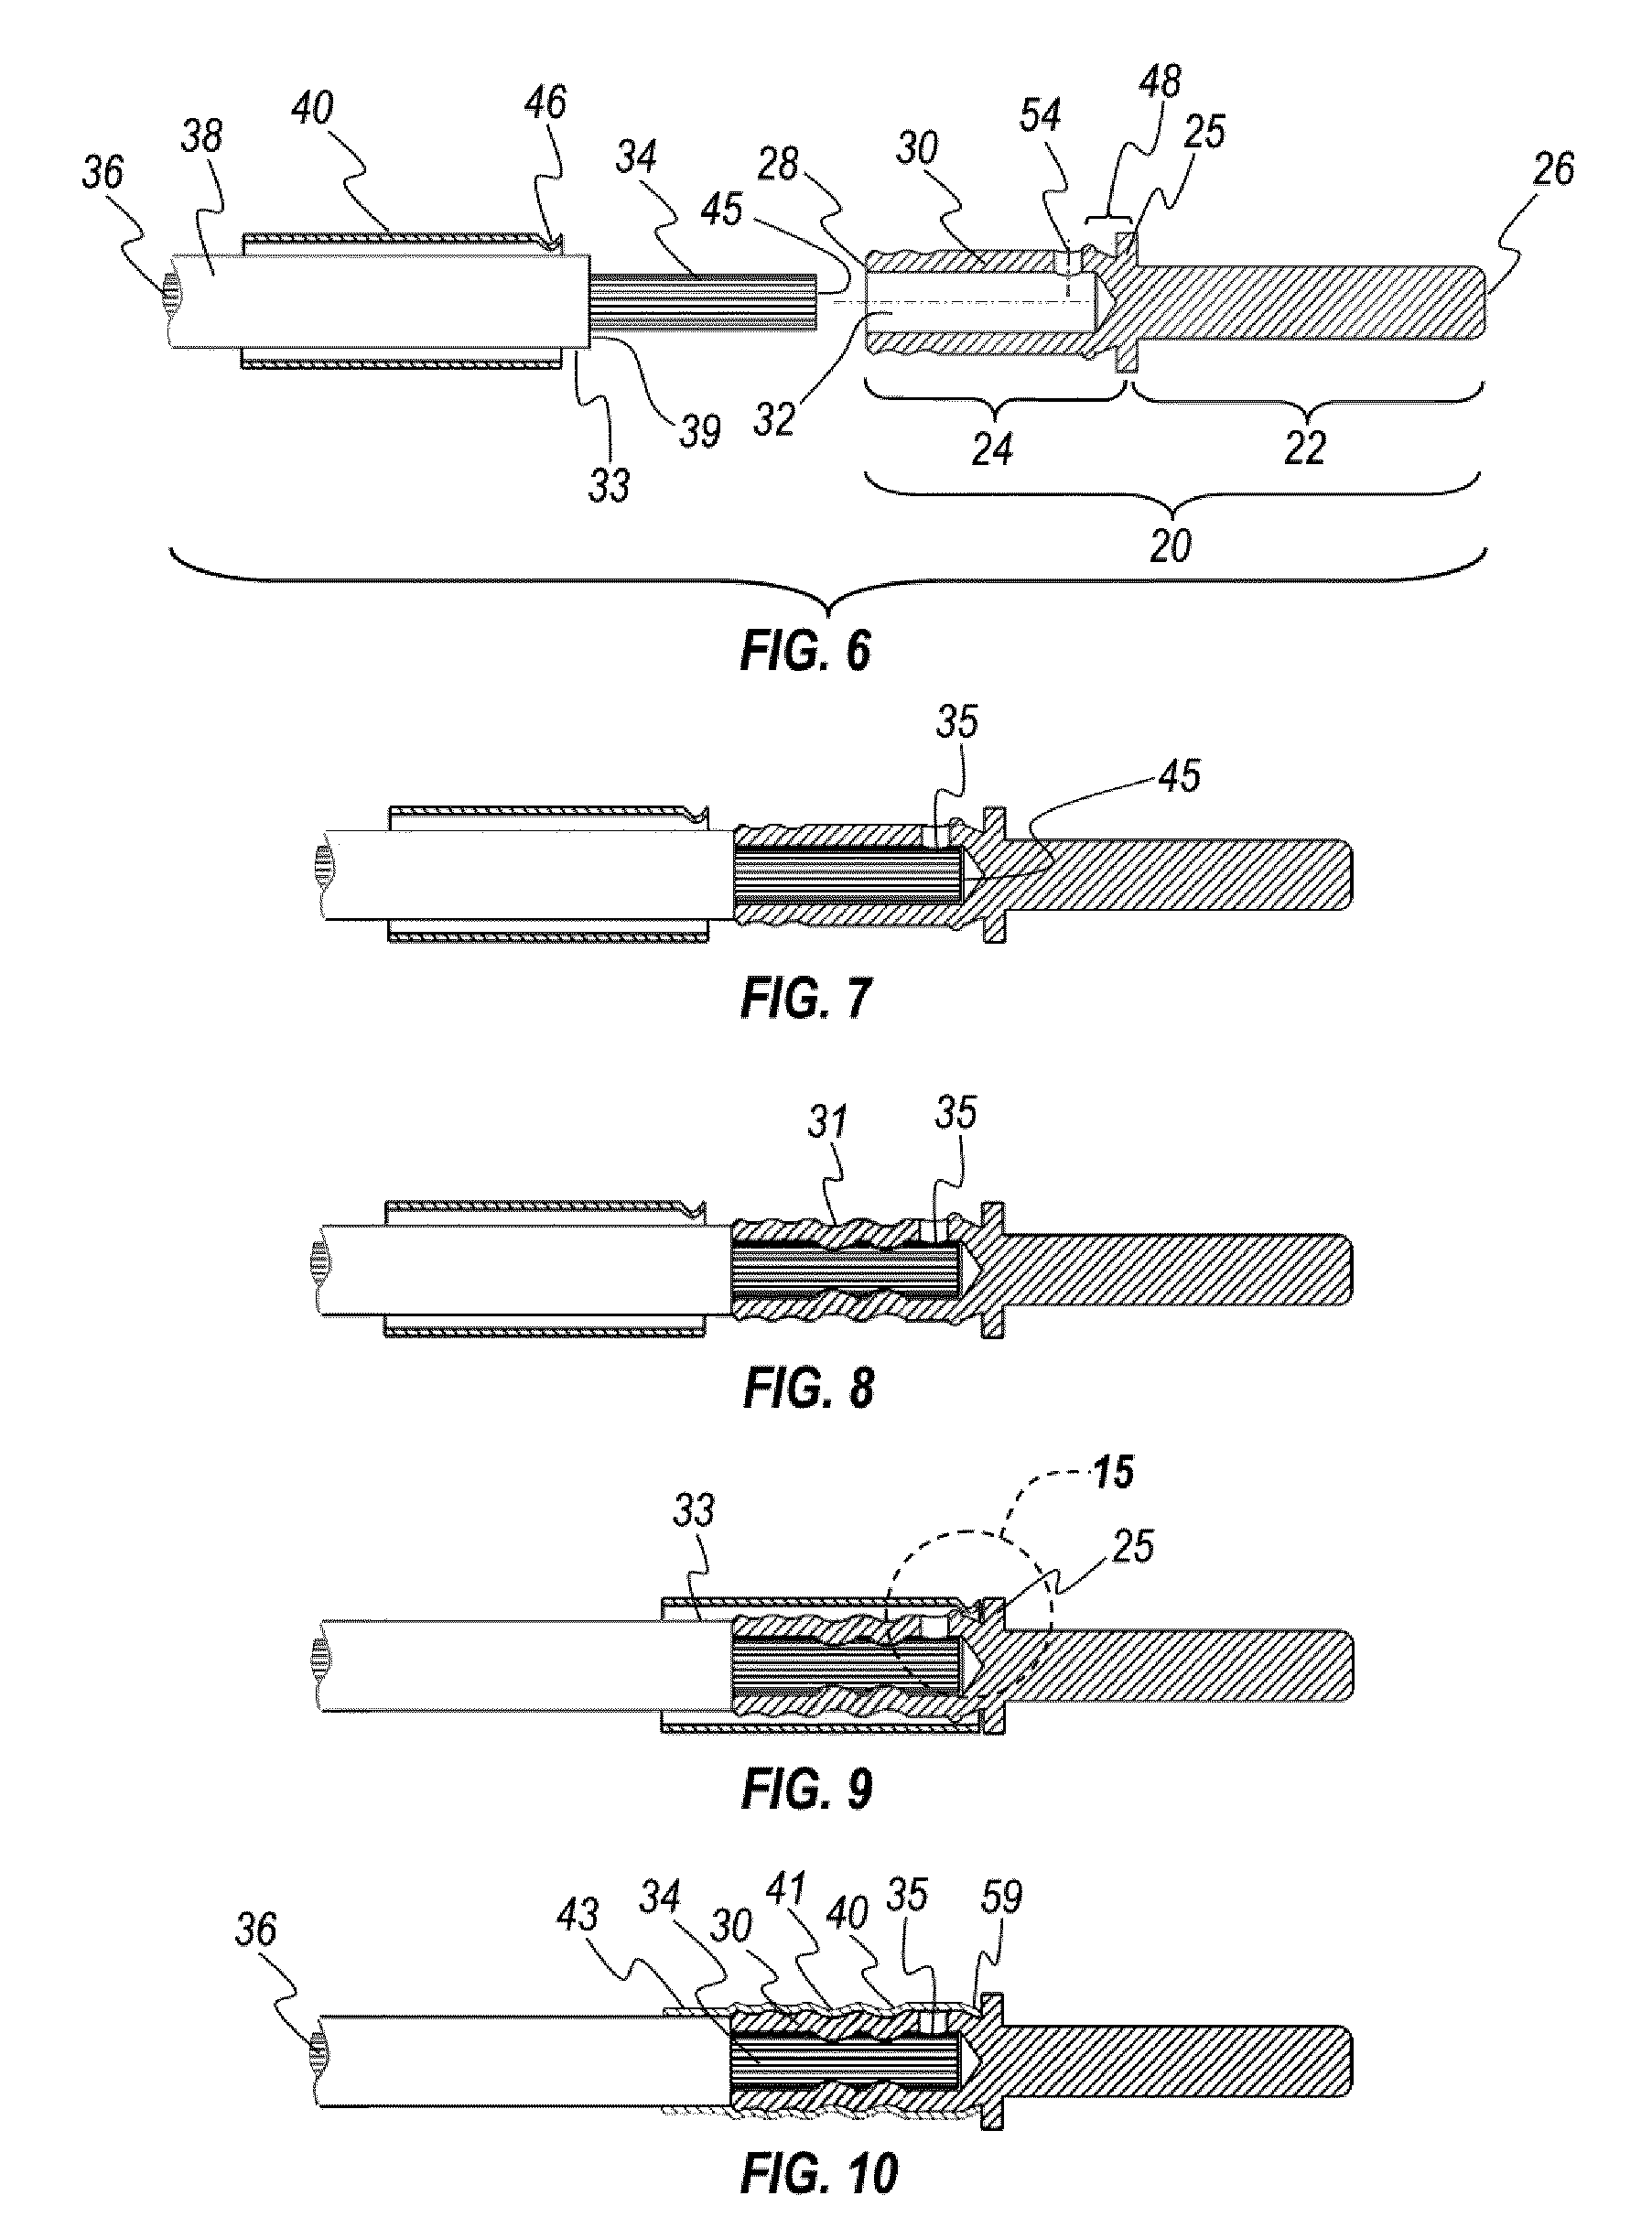 Electrical contact assembly including a sleeve member